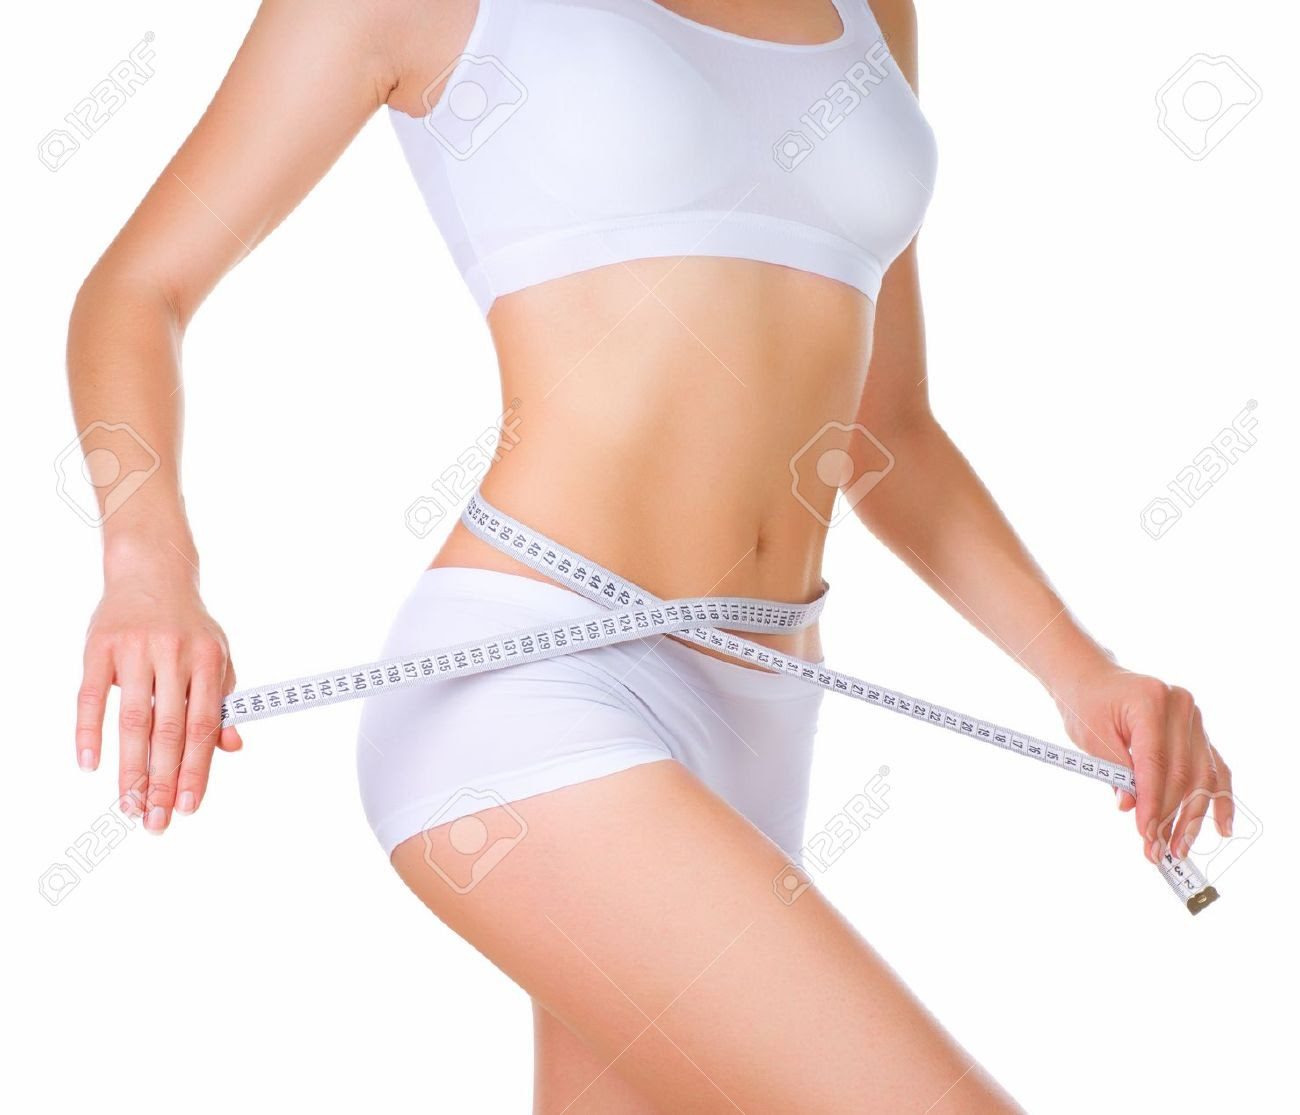 Woman Measuring Her Waistline Perfect Slim Body Stock Photo, Picture and  Royalty Free Image. Image 14649207.